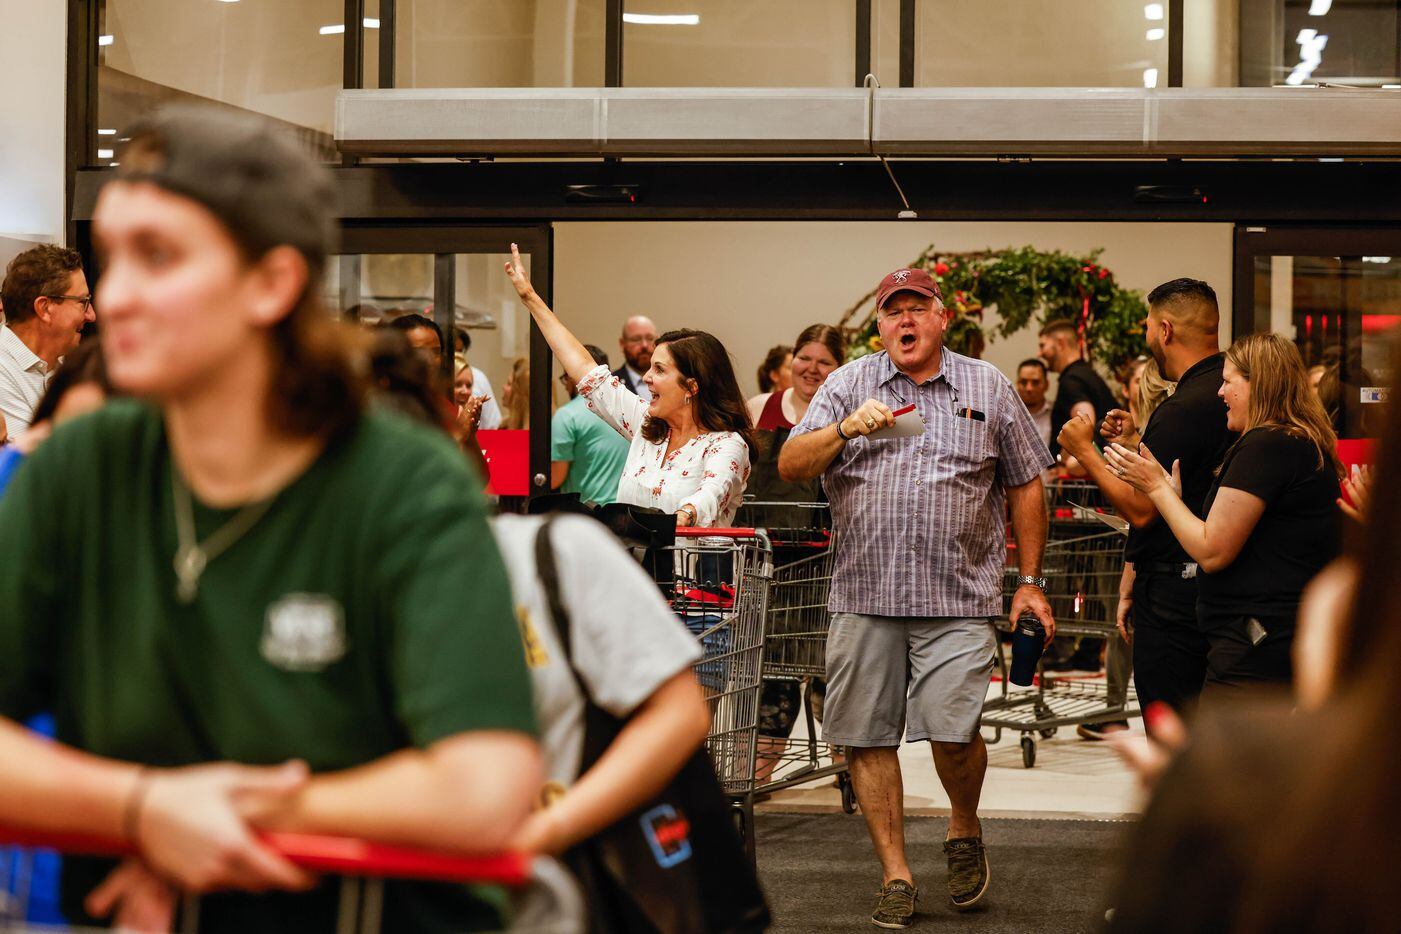 People celebrate as they enter to the new H-E-B store in Frisco on Wednesday, Sept. 21, 2022.